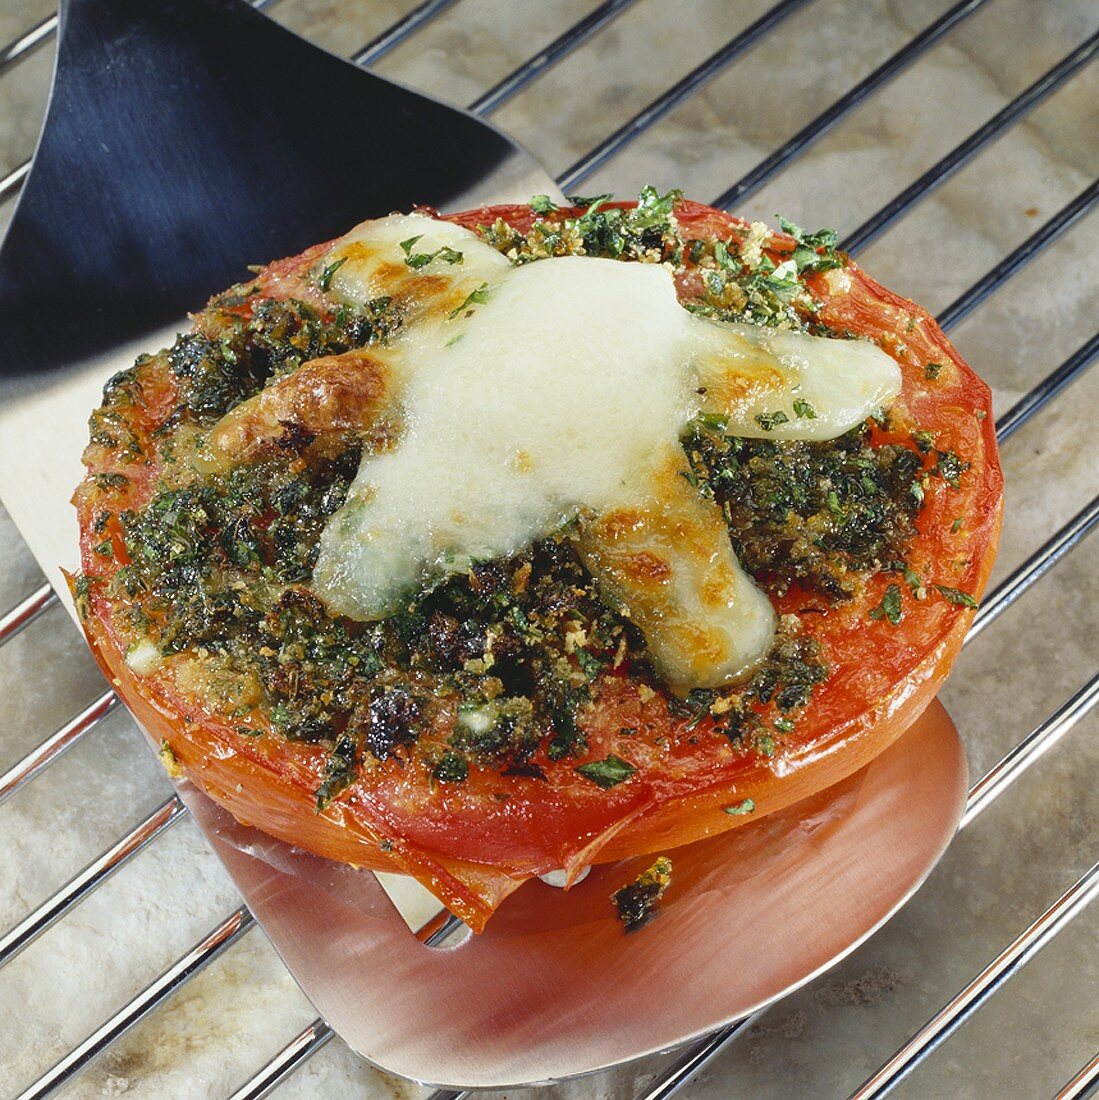 Baked tomato with herbs